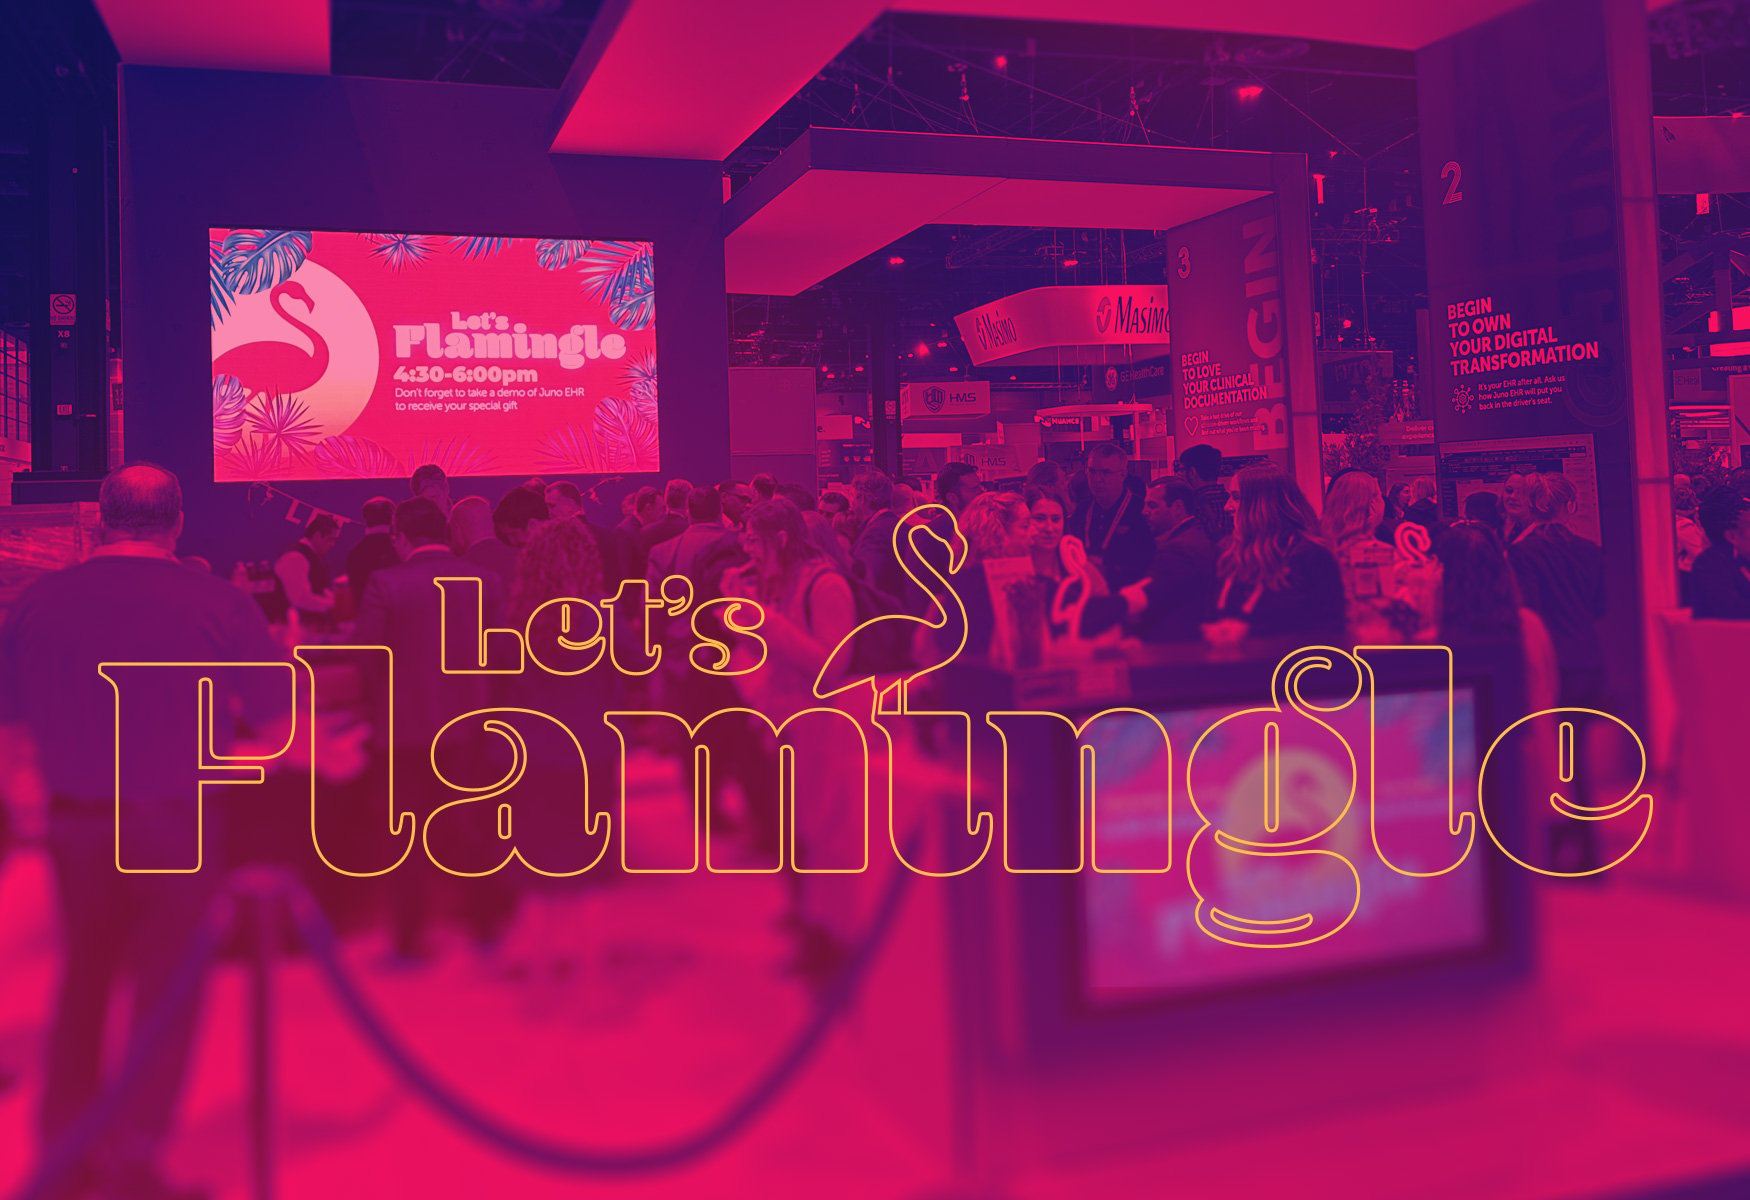 Pink image of Juno Health HIMSS booth with Let's Flamingle text